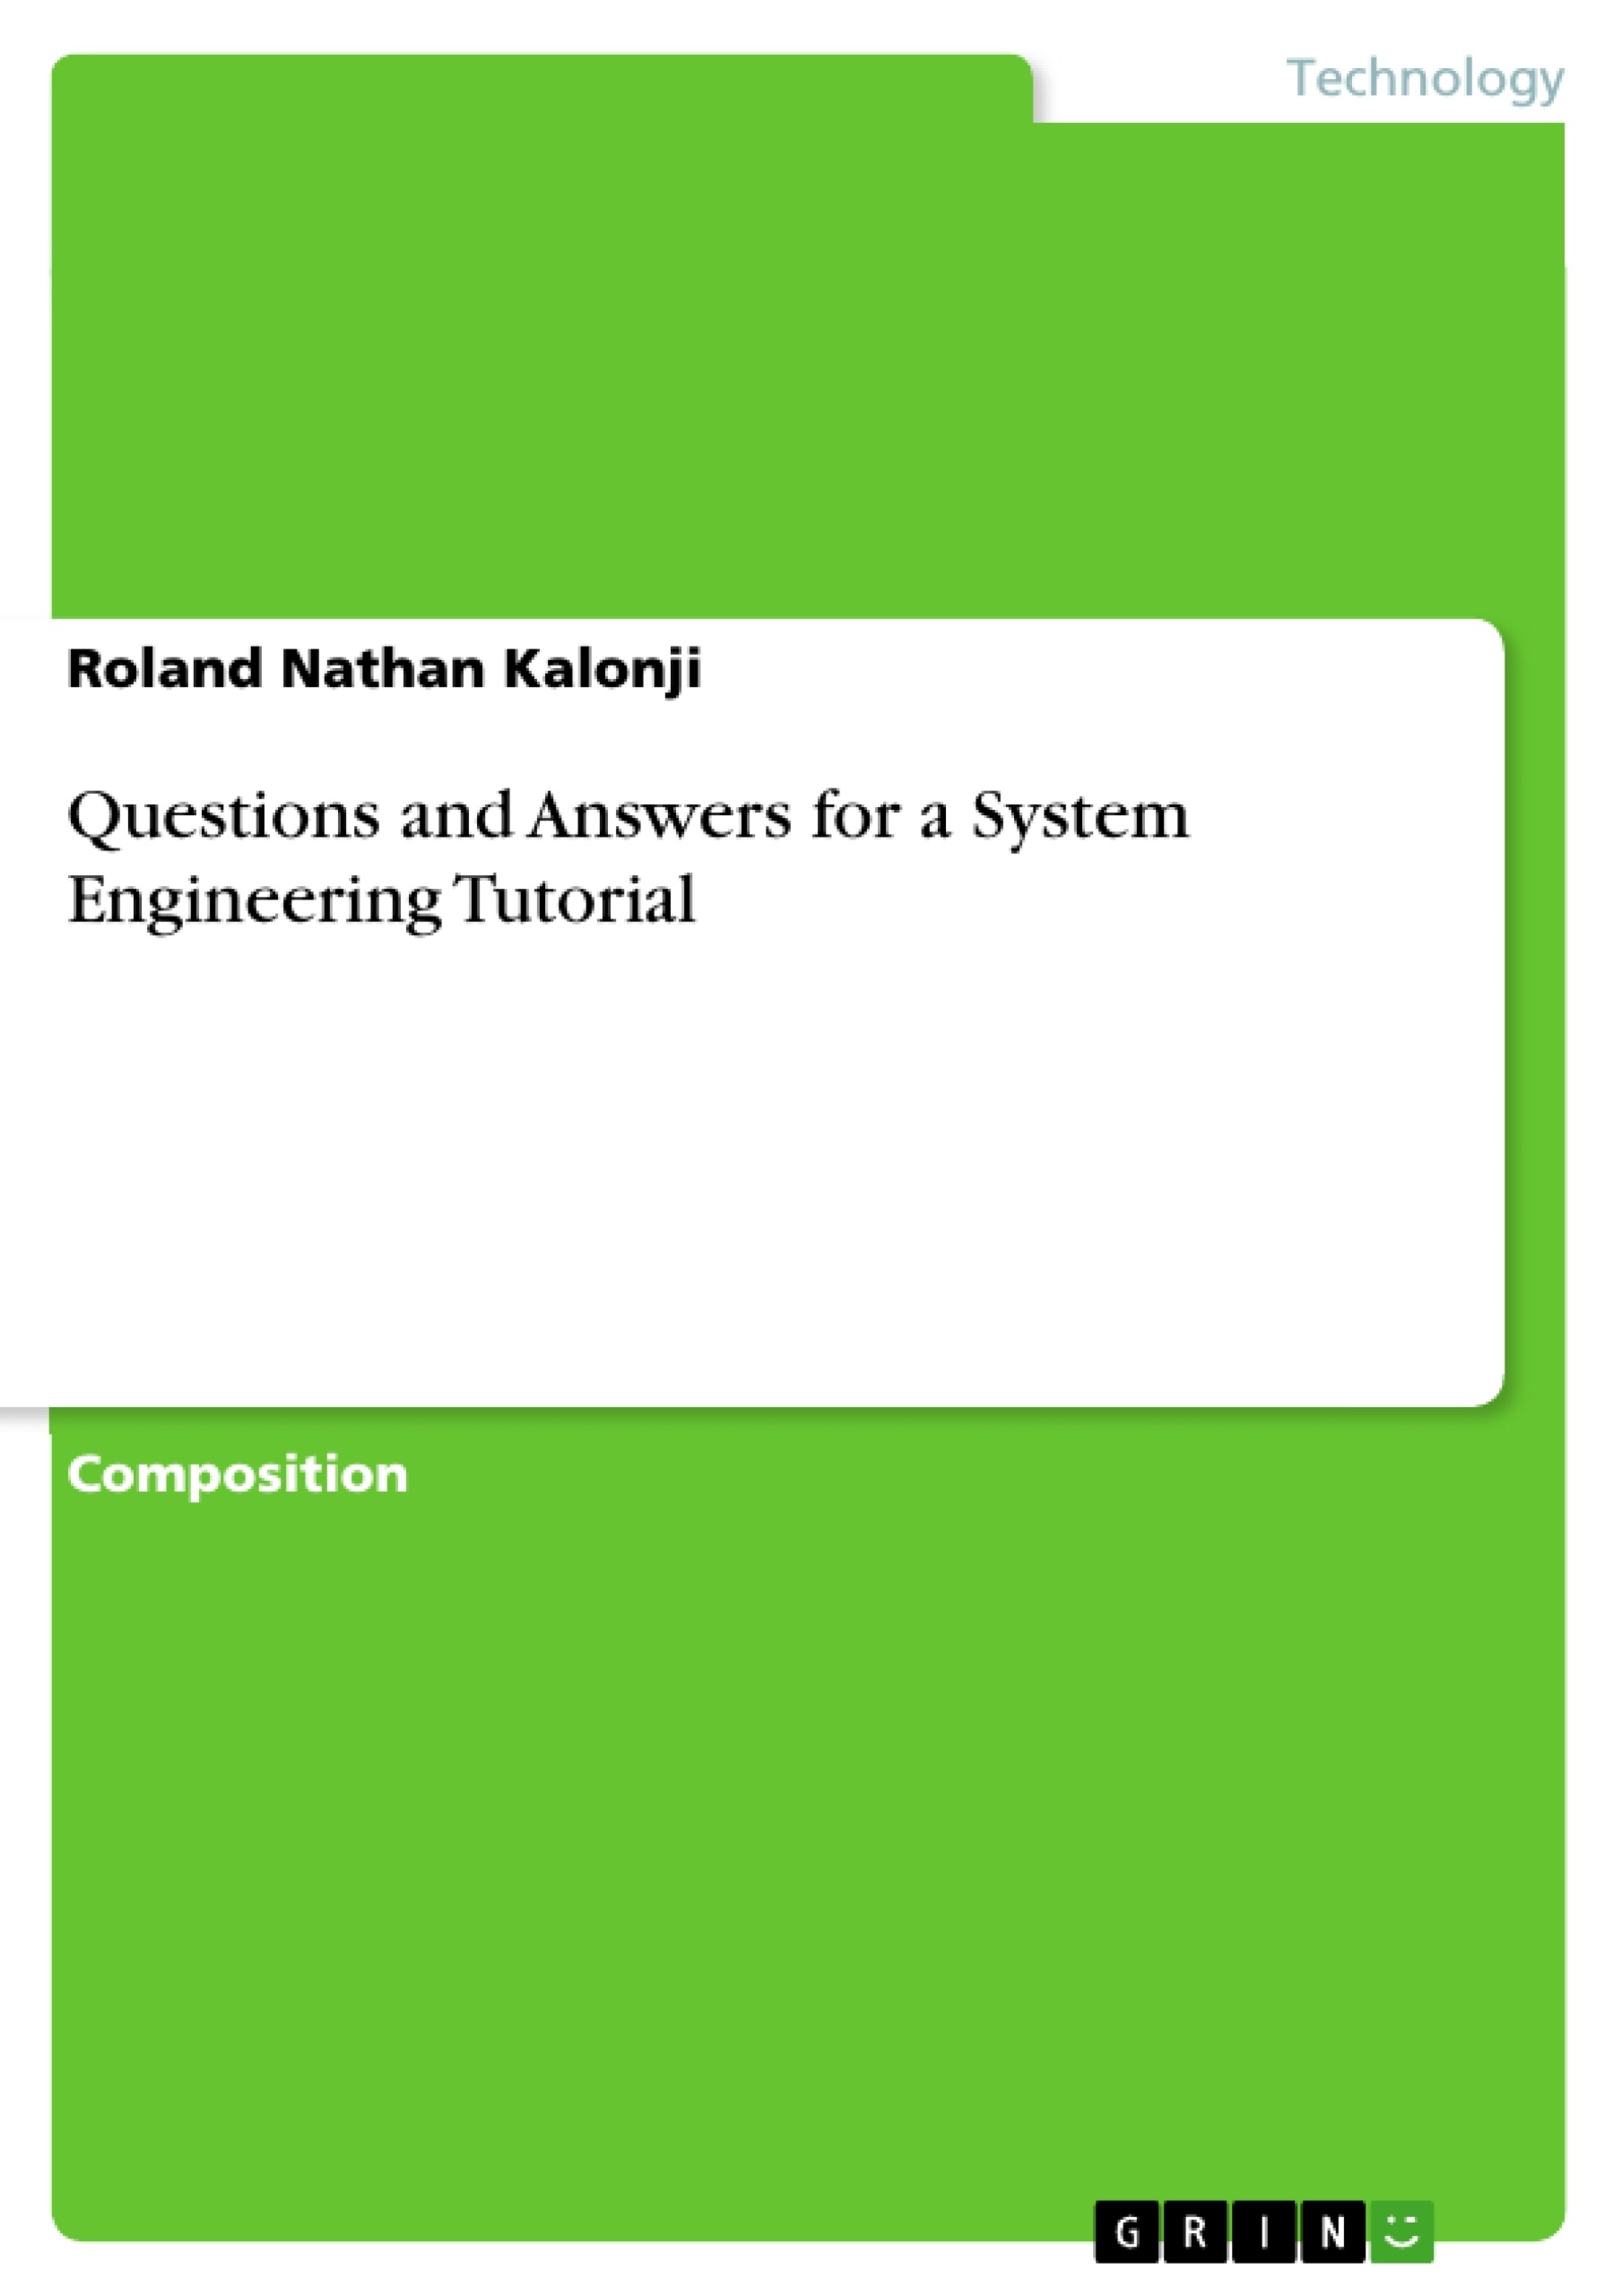 Title: Questions and Answers for a System Engineering Tutorial